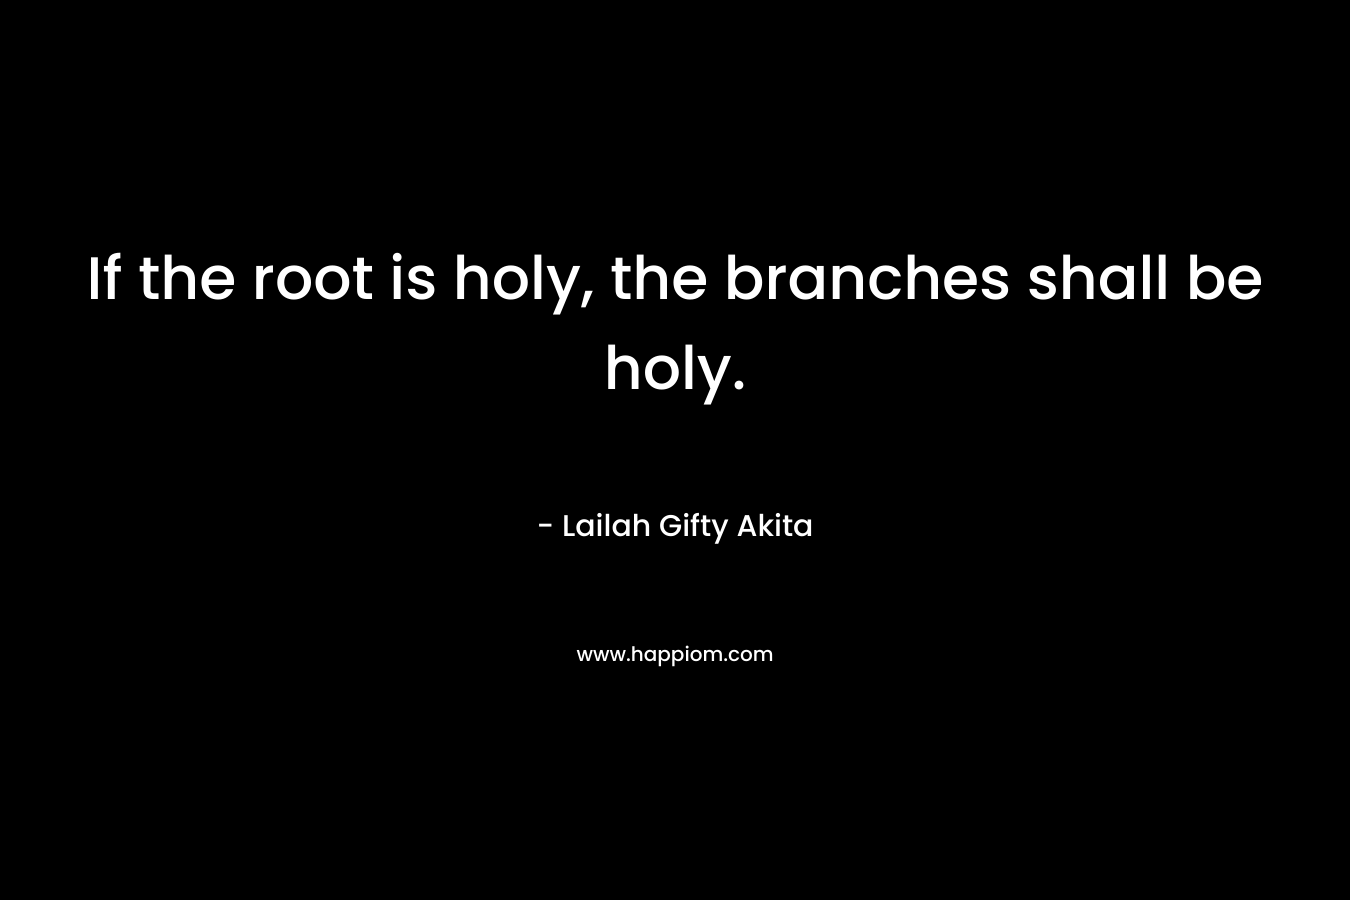 If the root is holy, the branches shall be holy.